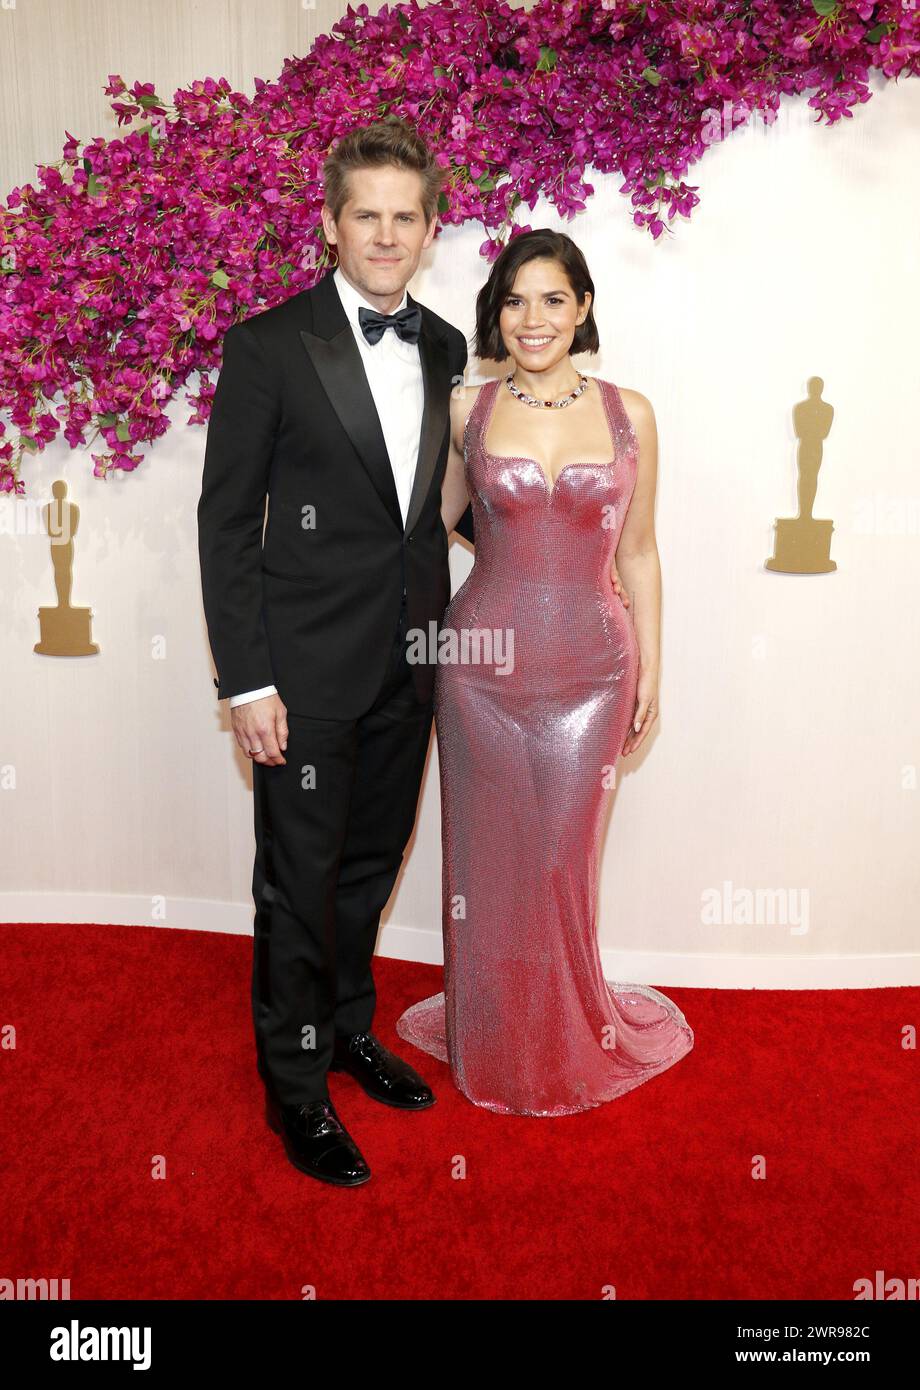 America Ferrera and Ryan Piers Williams at the 6th Annual Academy Awards held at the Dolby Theater in Hollywood, USA on March 10, 2024. Stock Photo